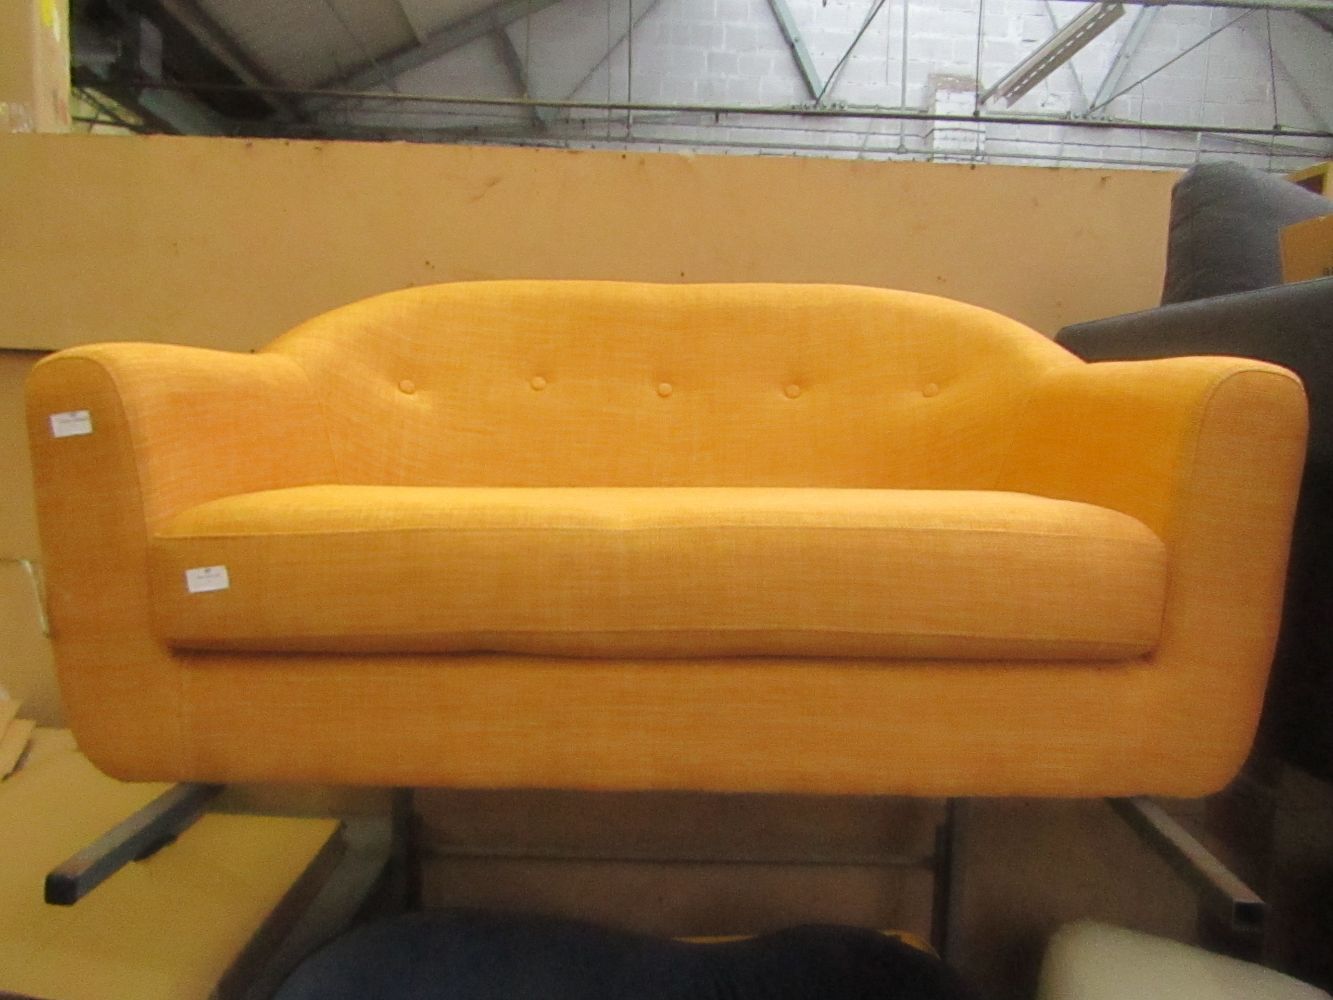 Sunday Furniture Auction Containing Sofas, Cushions, Pet Beds & Much More From Made.com, Cox & Cox & More!